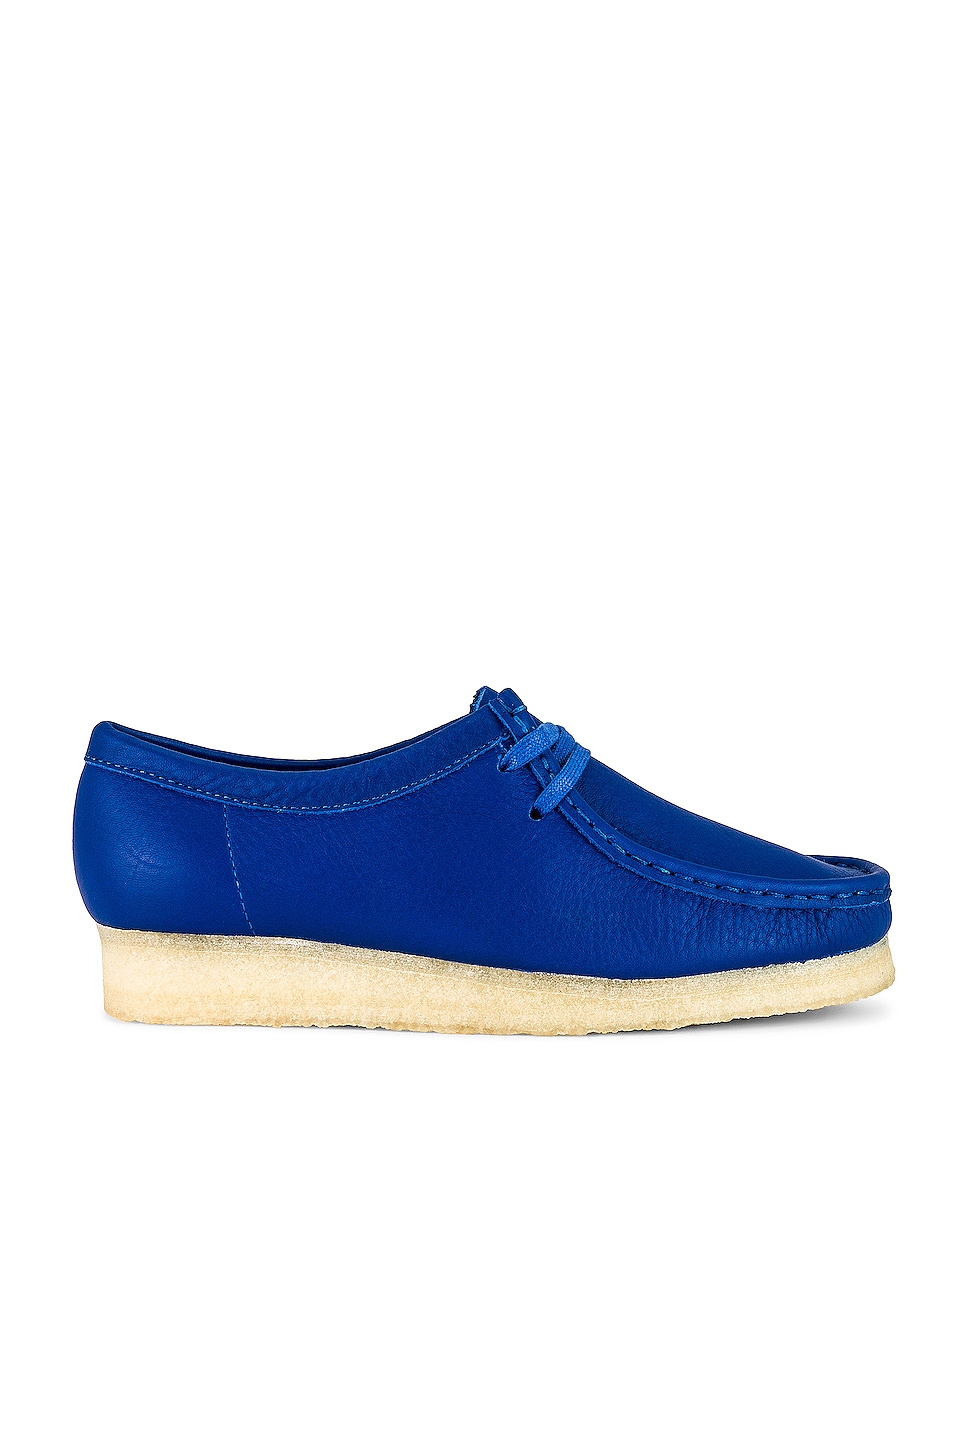 Image 1 of Clarks Wallabee Shoe in Bright Blue